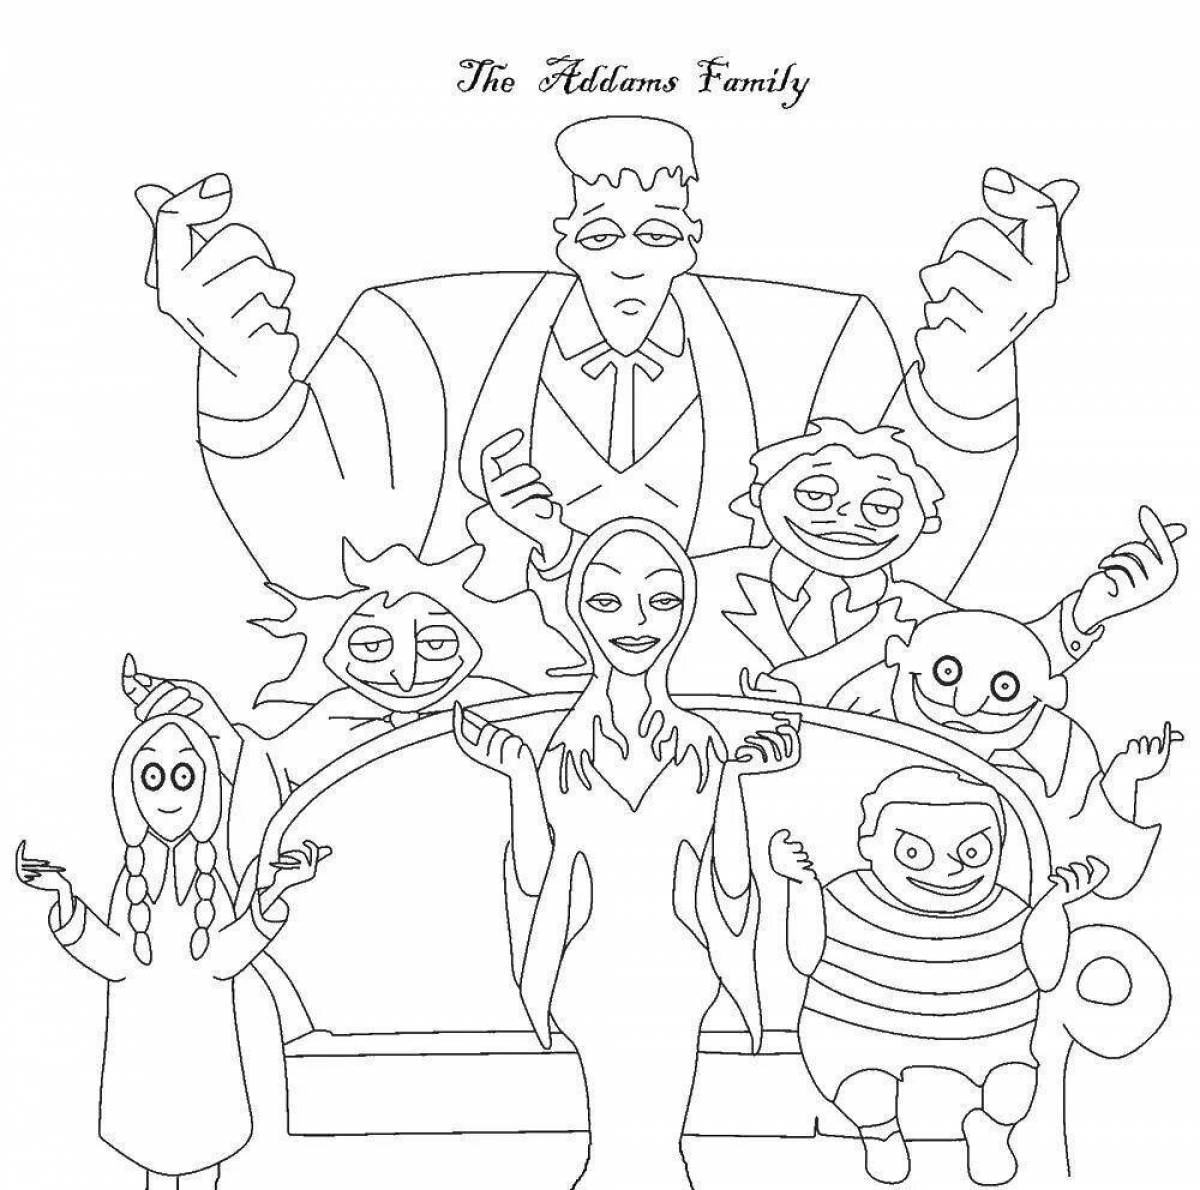 Coloring page adams family festival